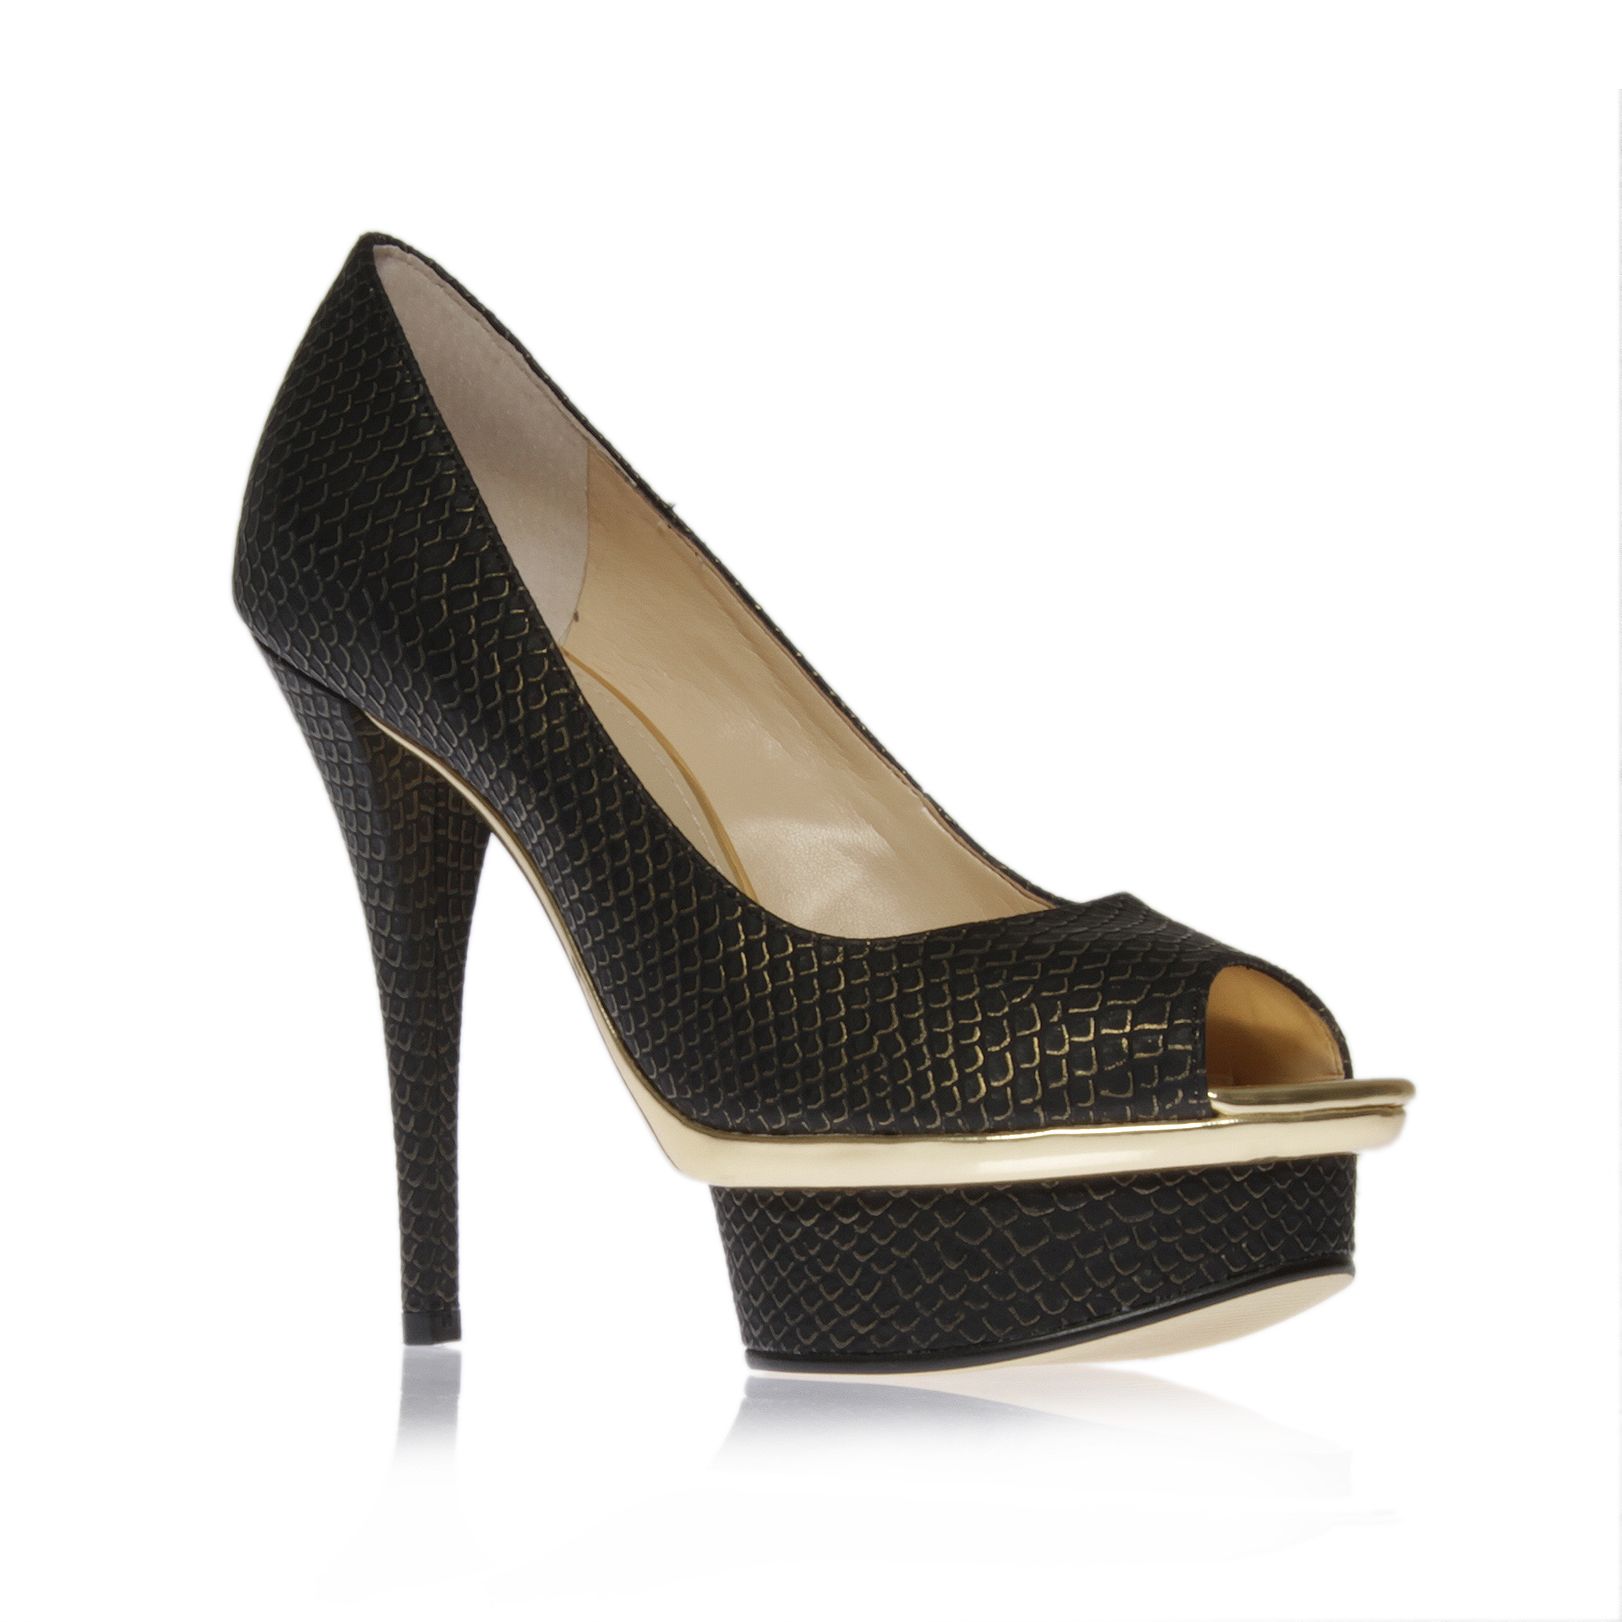 Enzo Angiolini Loveyoutoo3 Court Shoes in Black | Lyst